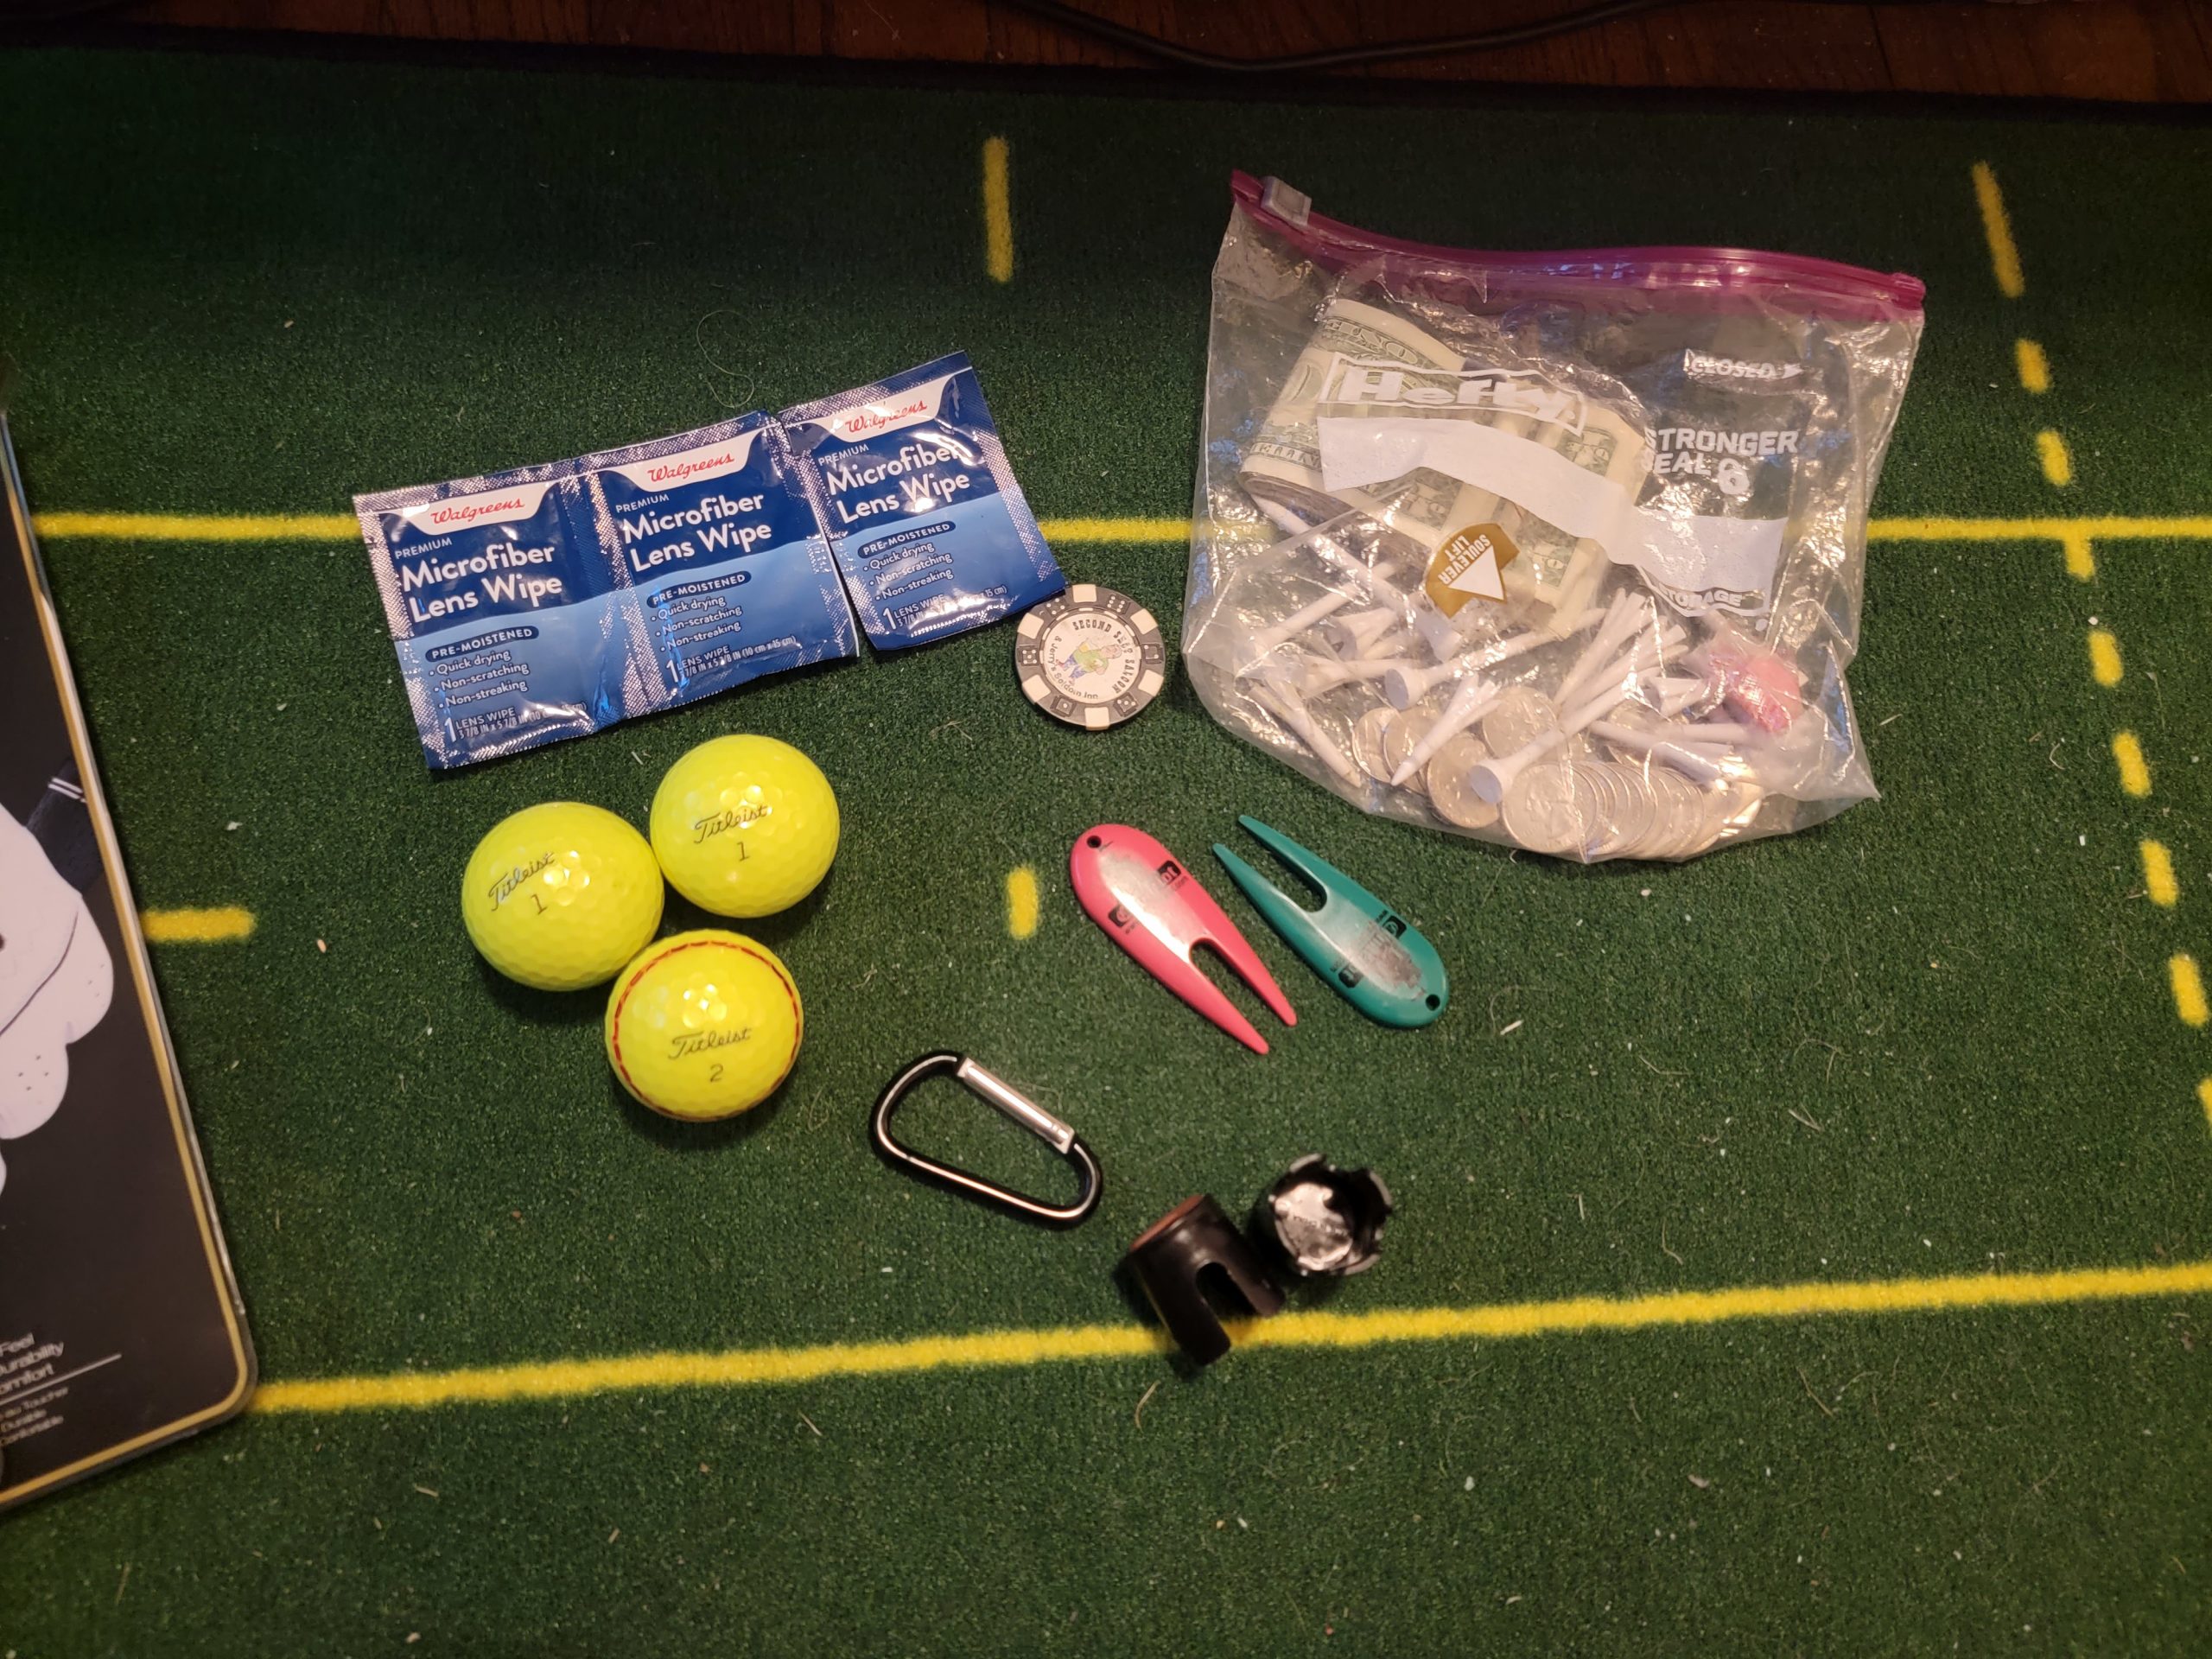 Old Duffer Golf image of stuff I keep in the top pocket of my golf bag